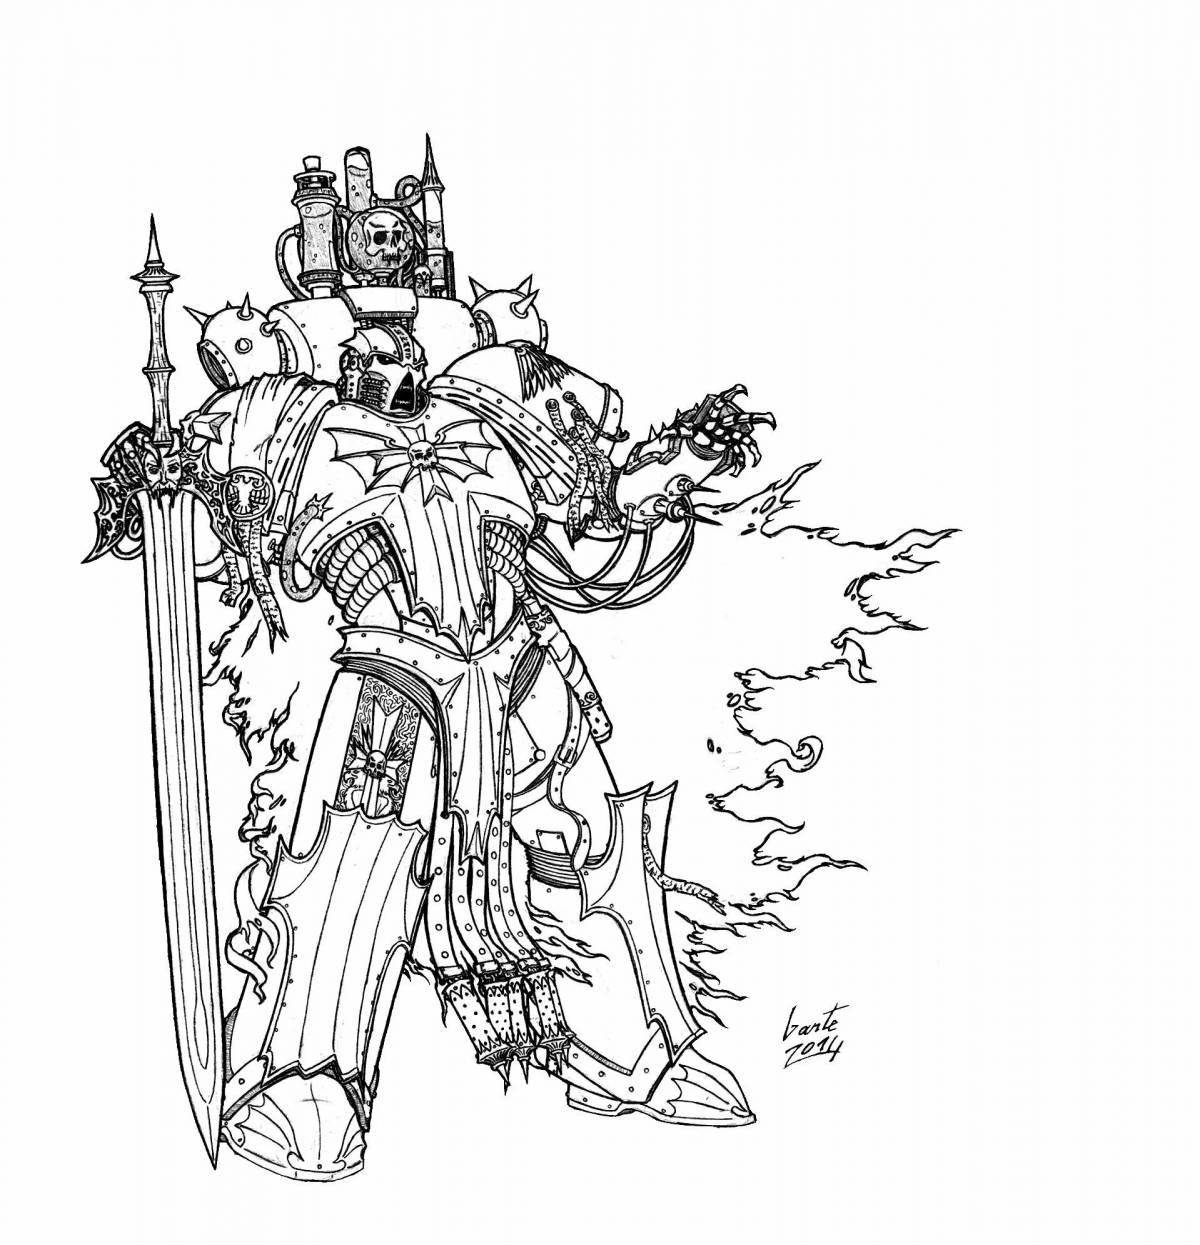 Awesome Space Marine coloring page